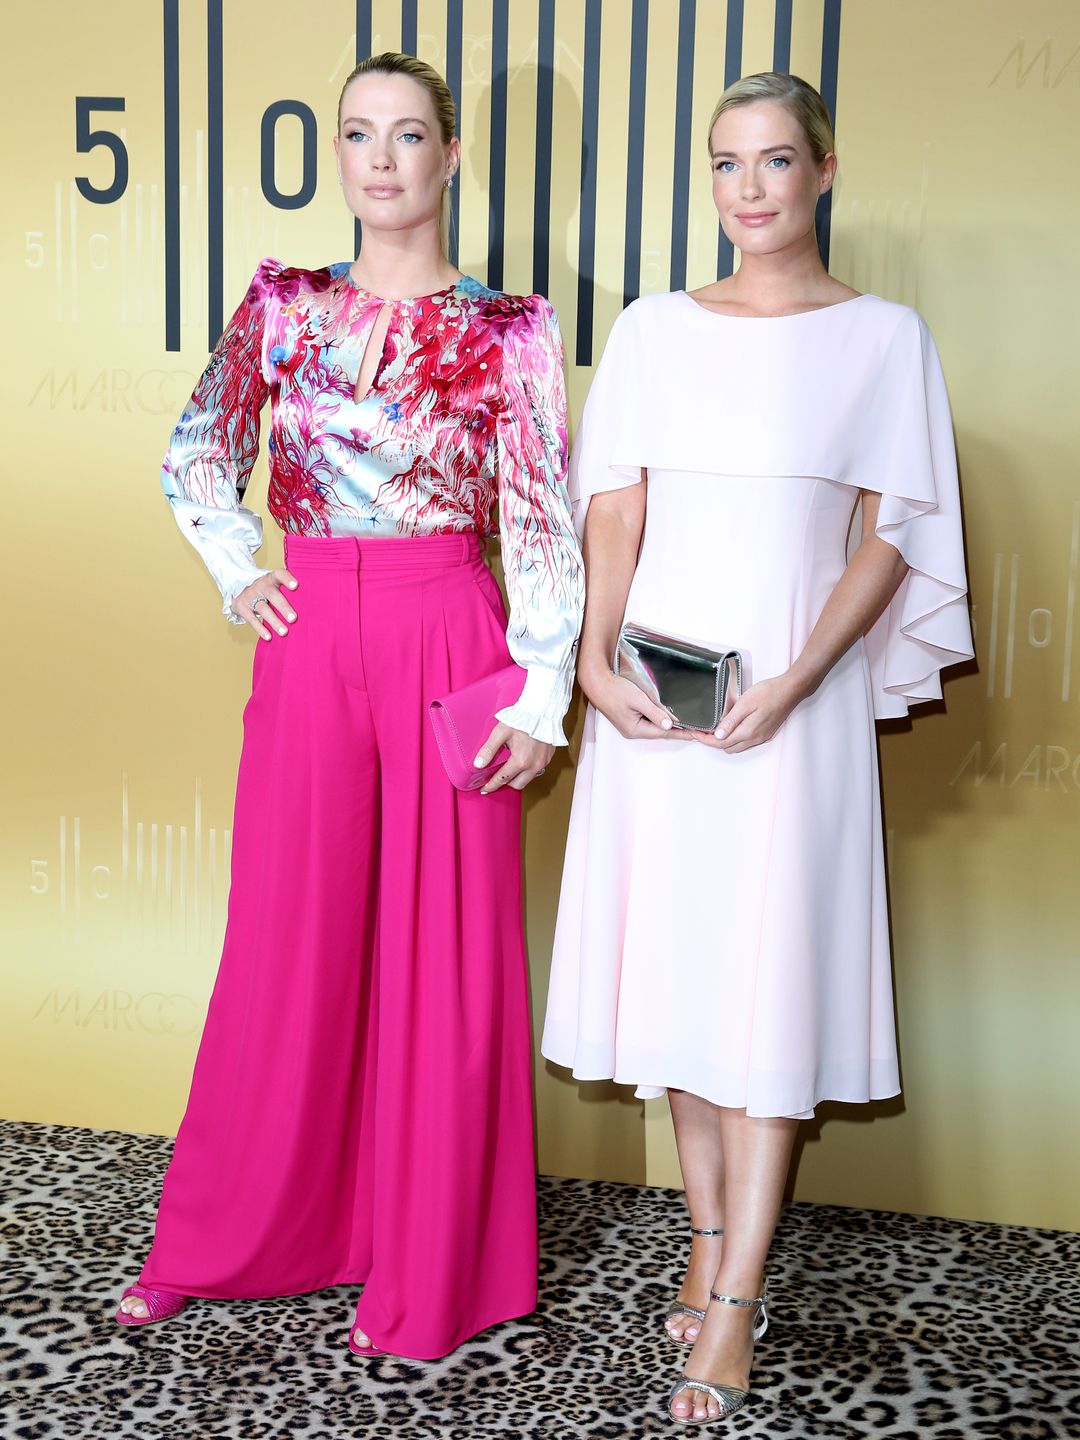 BODELSHAUSEN, GERMANY - AUGUST 31:  Lady Amelia Spencer and sister Lady Eliza Spencer during the Marc Cain 50 years anniversary fashion show event Sommernachtstraum" at Marc Cain GmbH on August 31, 2023 in Bodelshausen, Germany. (Photo by Gisela Schober/Getty Images)